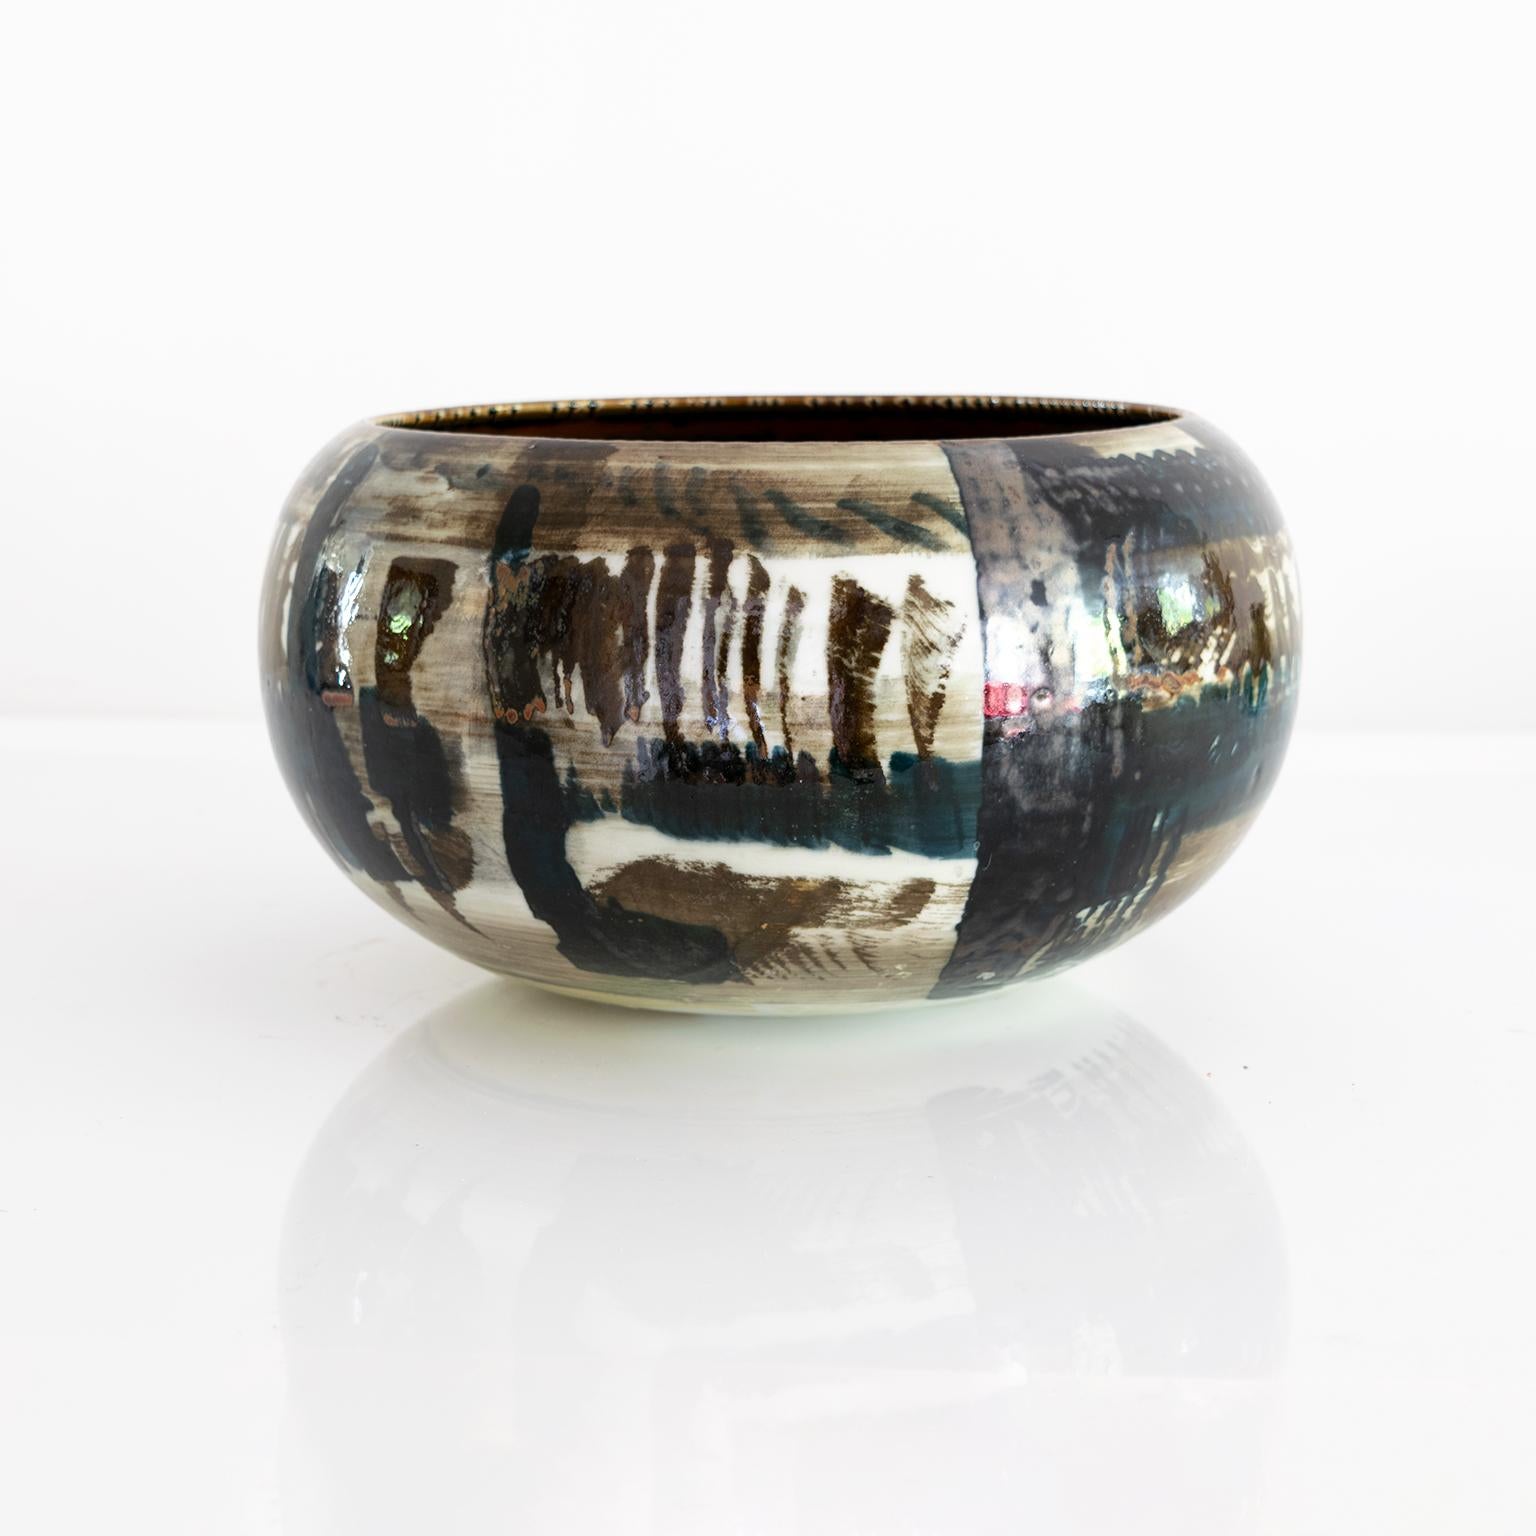 Scandinavian Modern Carl-Harry Stalhane Ceramic Bowl with Abstract Design Rorstrand, Sweden